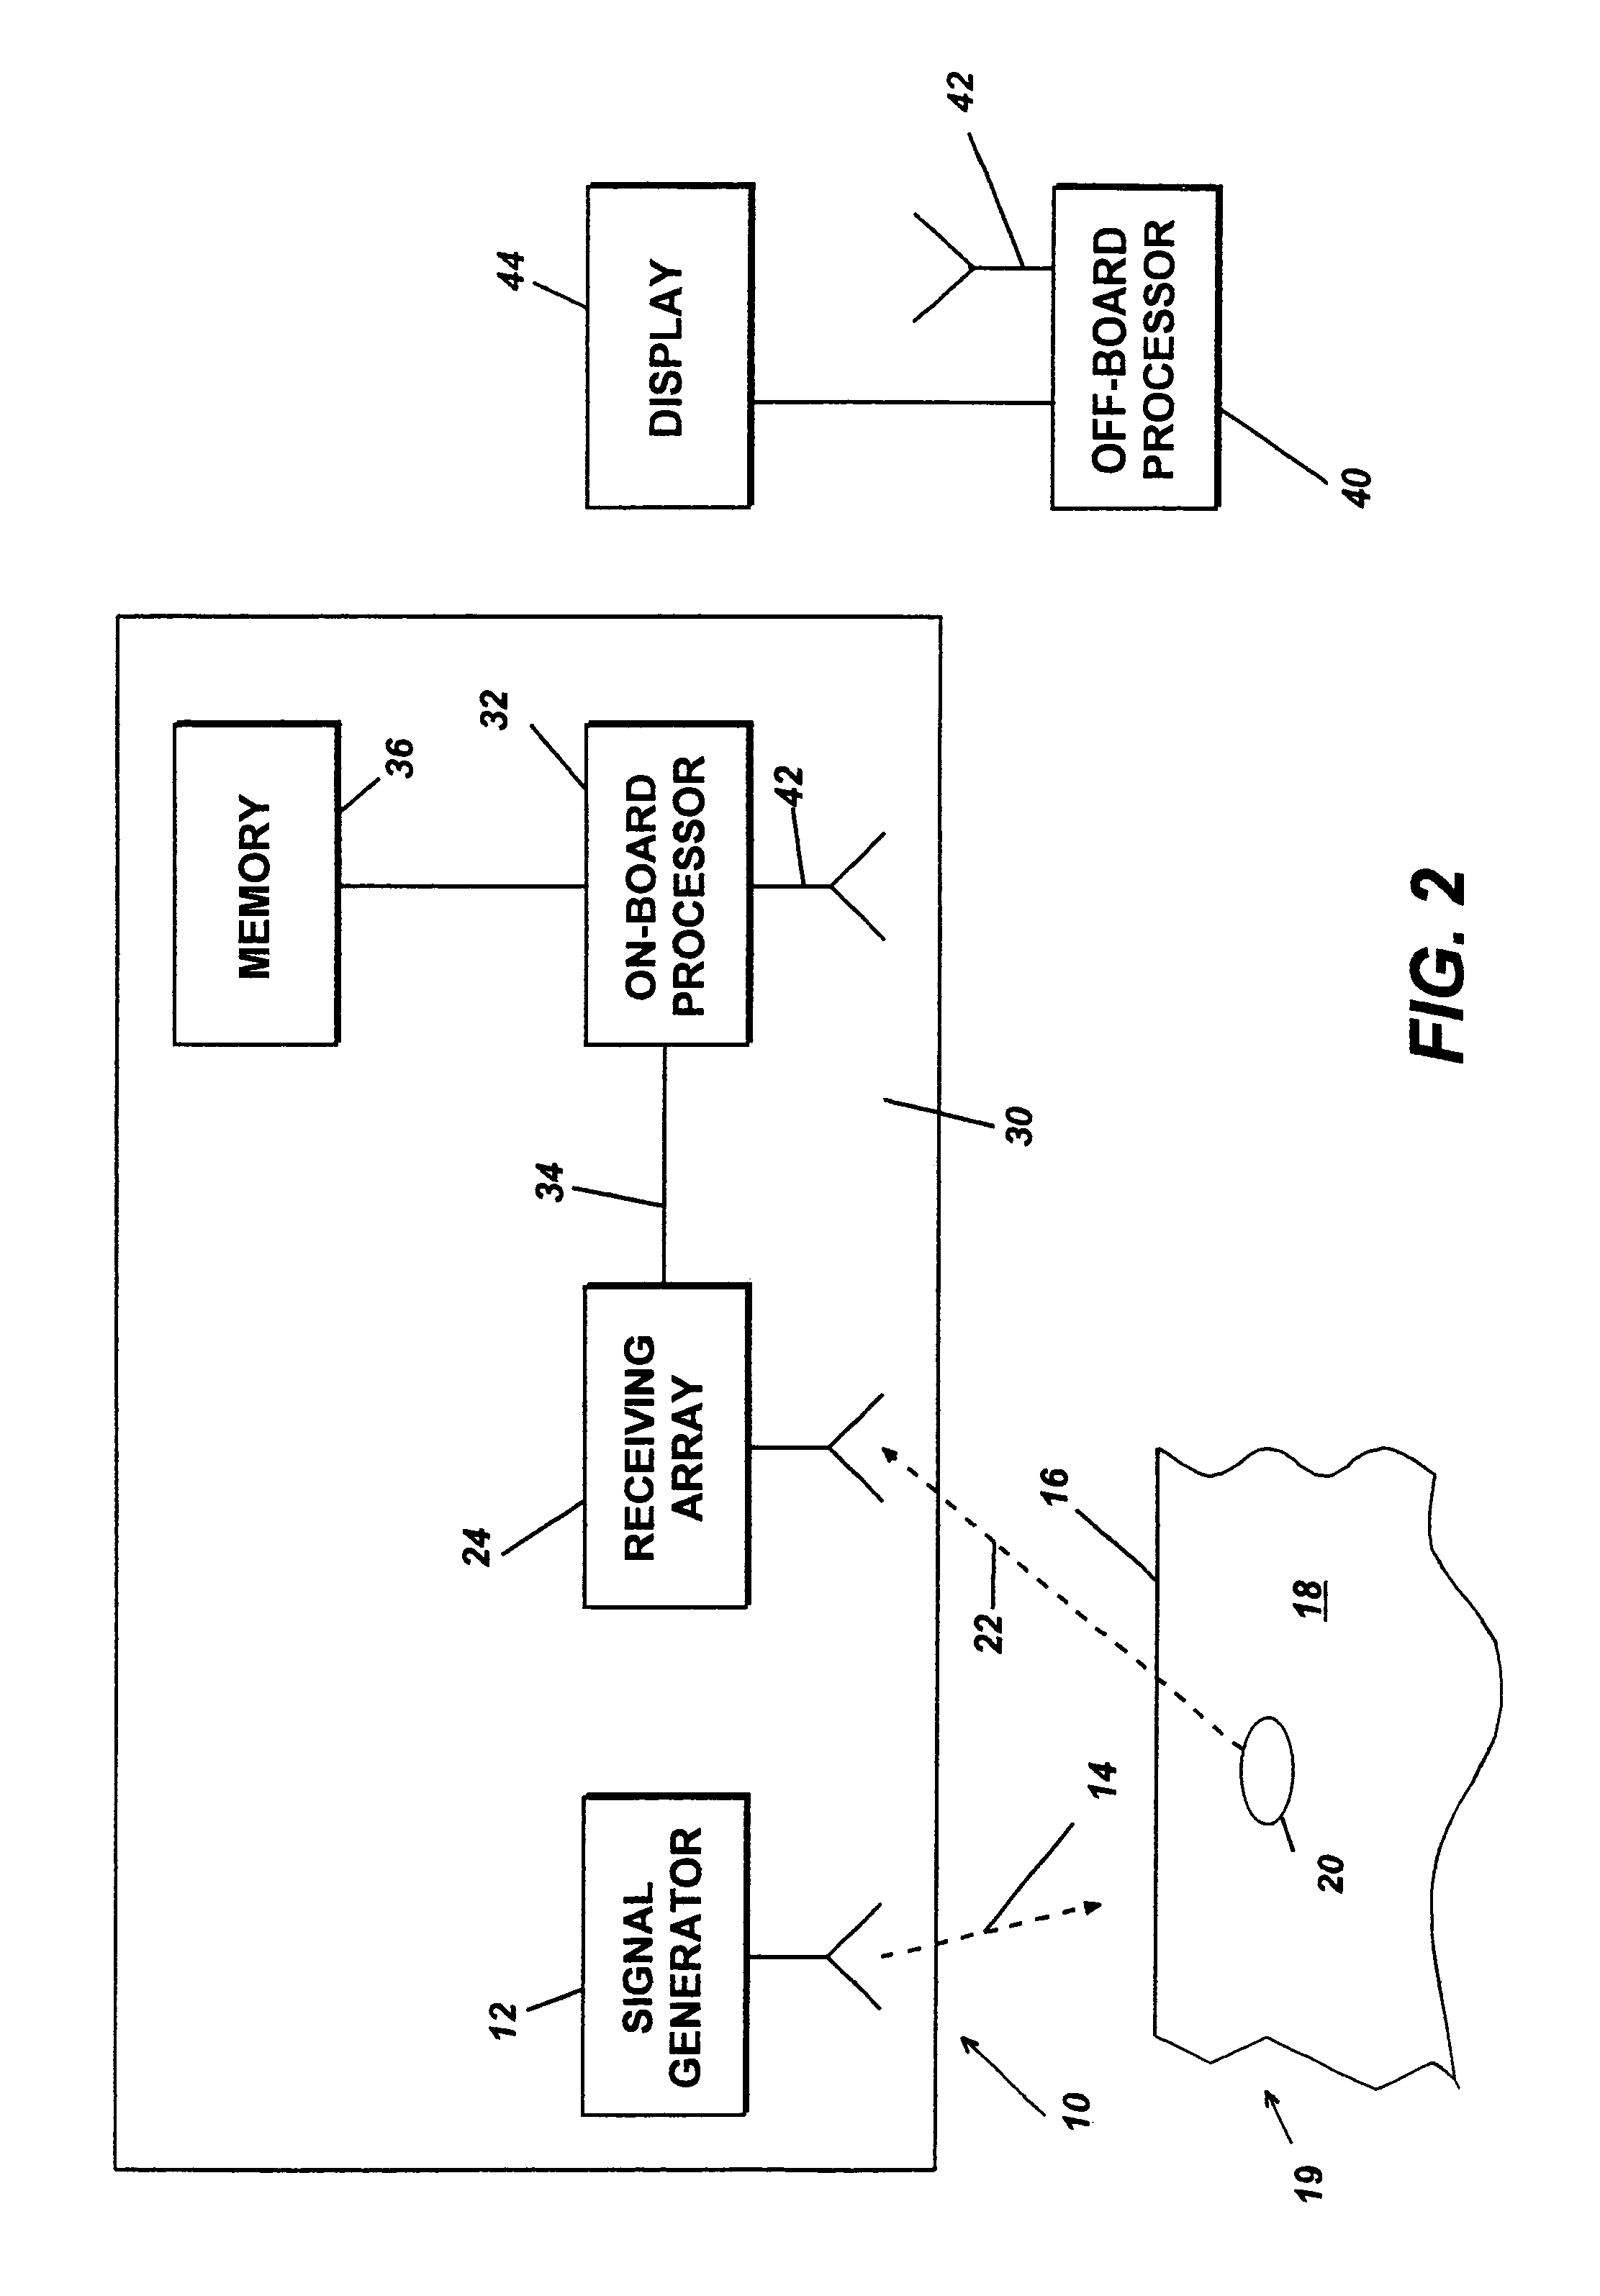 Three-dimensional synthetic aperture radar for mine detection and other uses